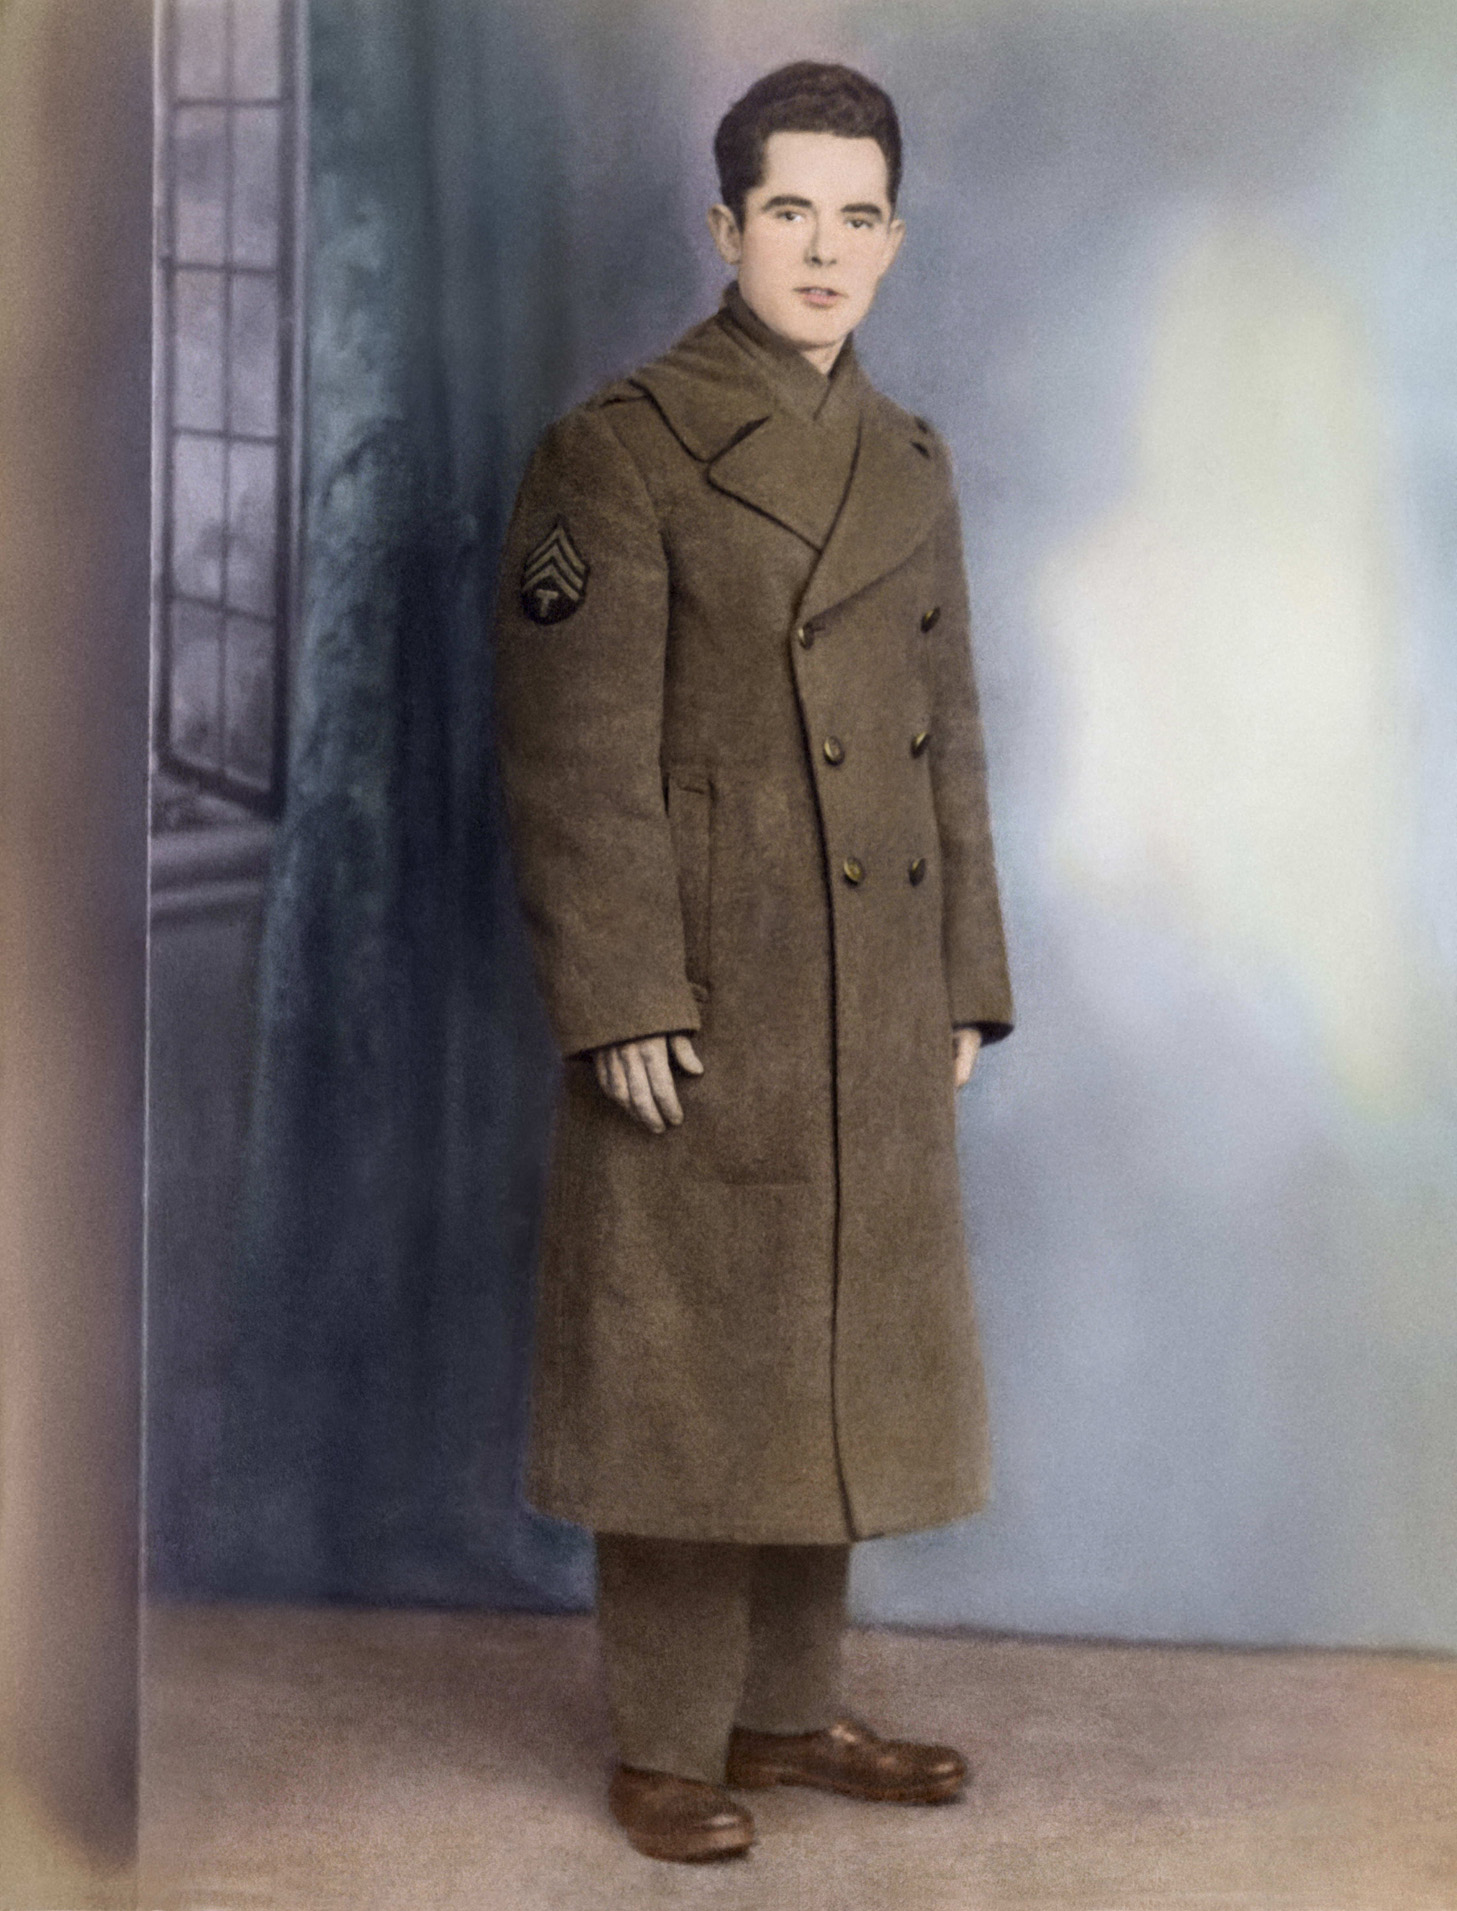 This is a photo of my father, Bernard Warner. It was taken when he was stationed in Ireland before joining his Army unit during World War II. There is a note on the back of the photo, "Inniskillin 1946". View full size.